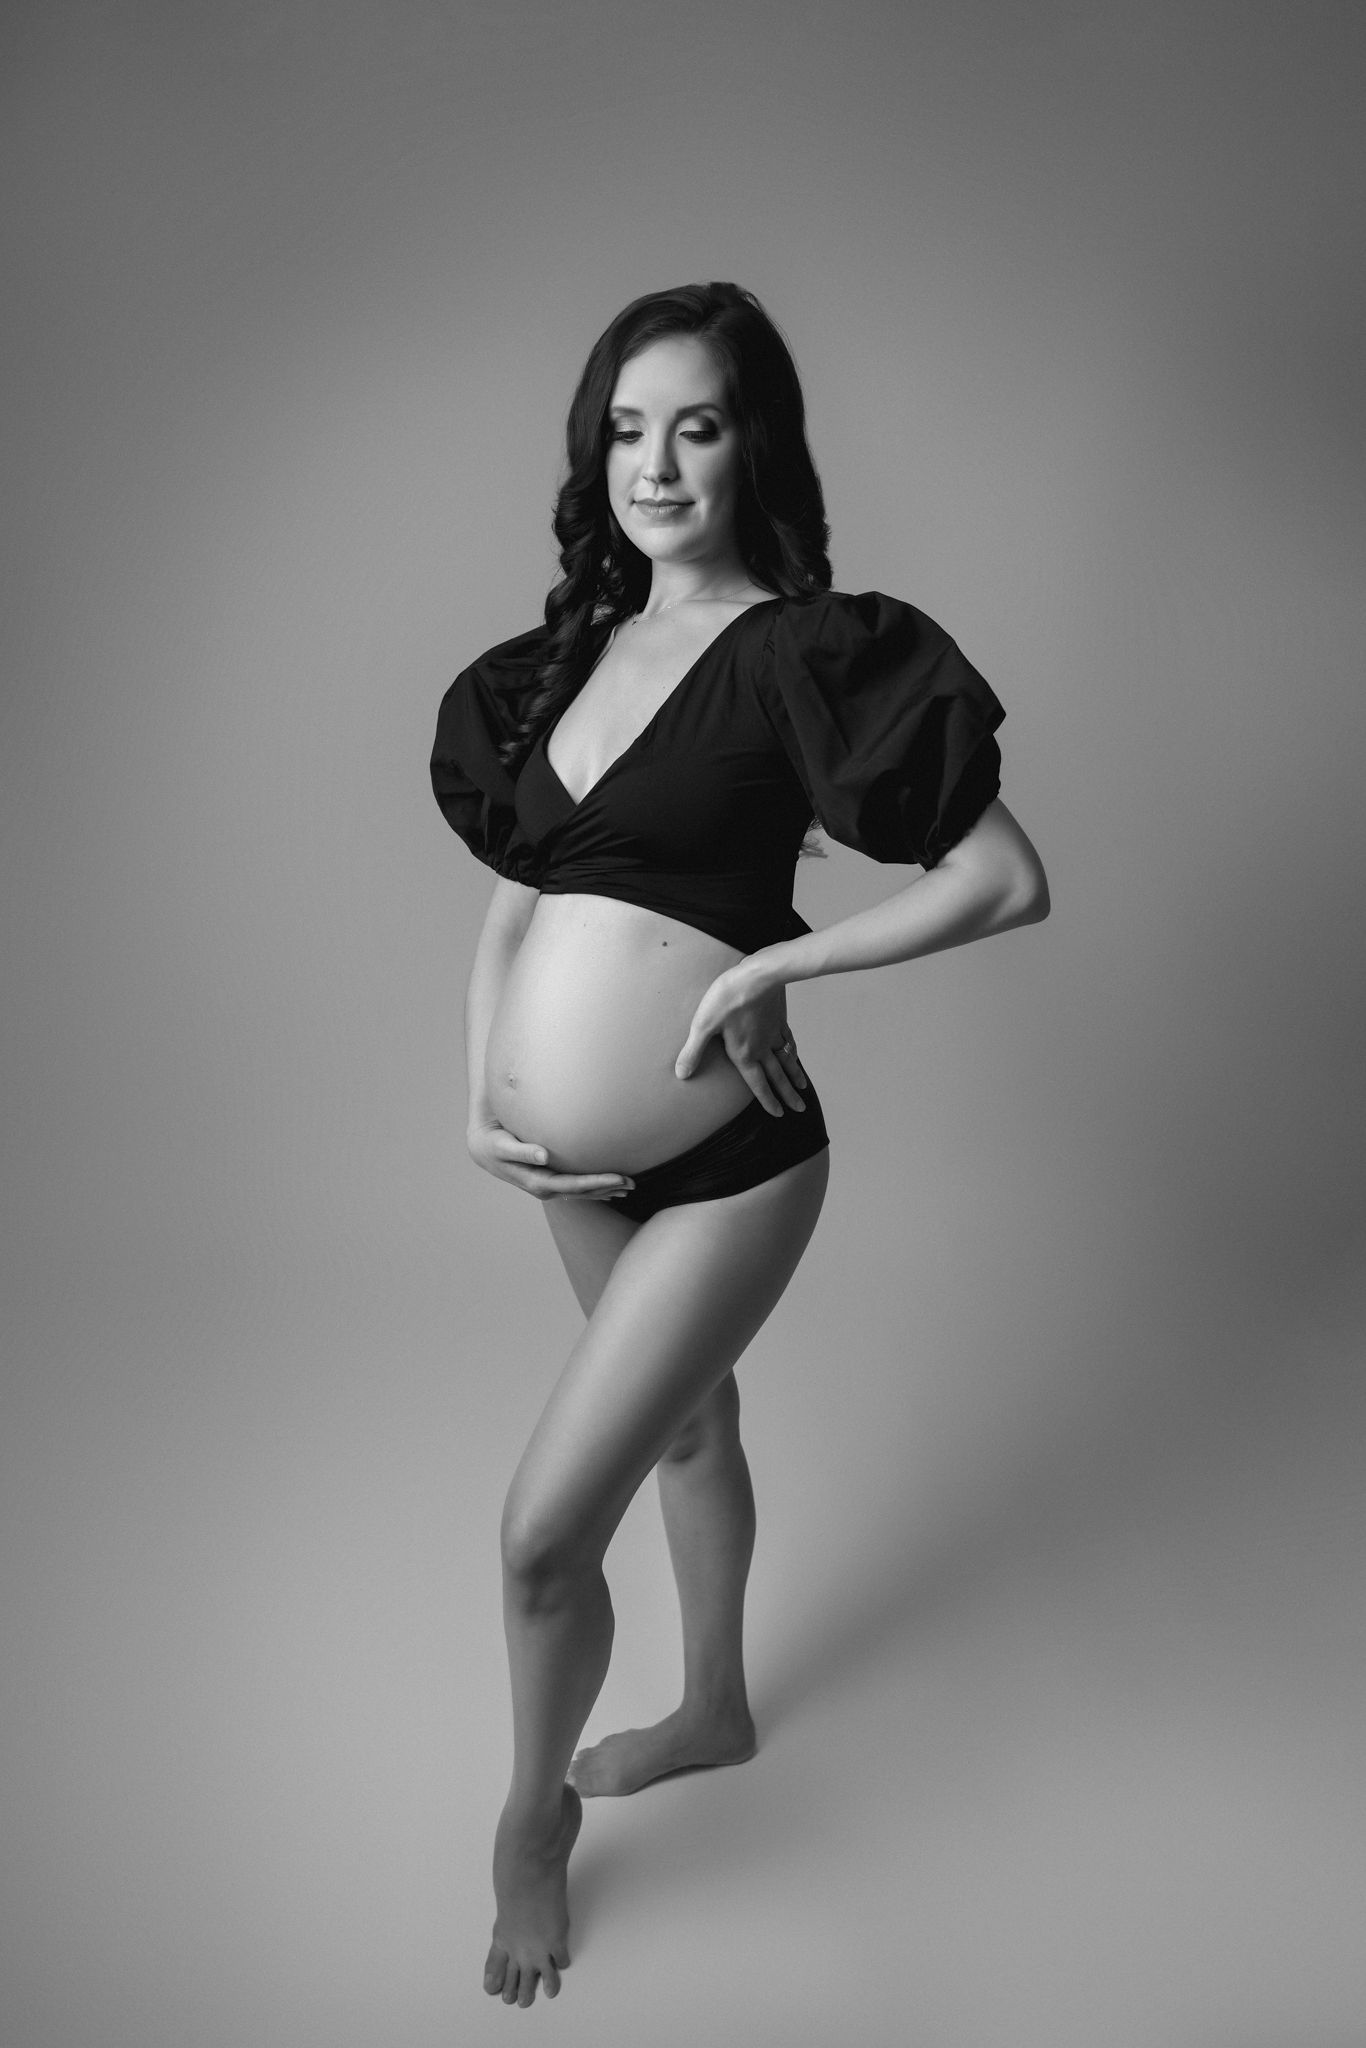 A mother to be in a black top stands in a studio with a hand on her hip and other on her belly